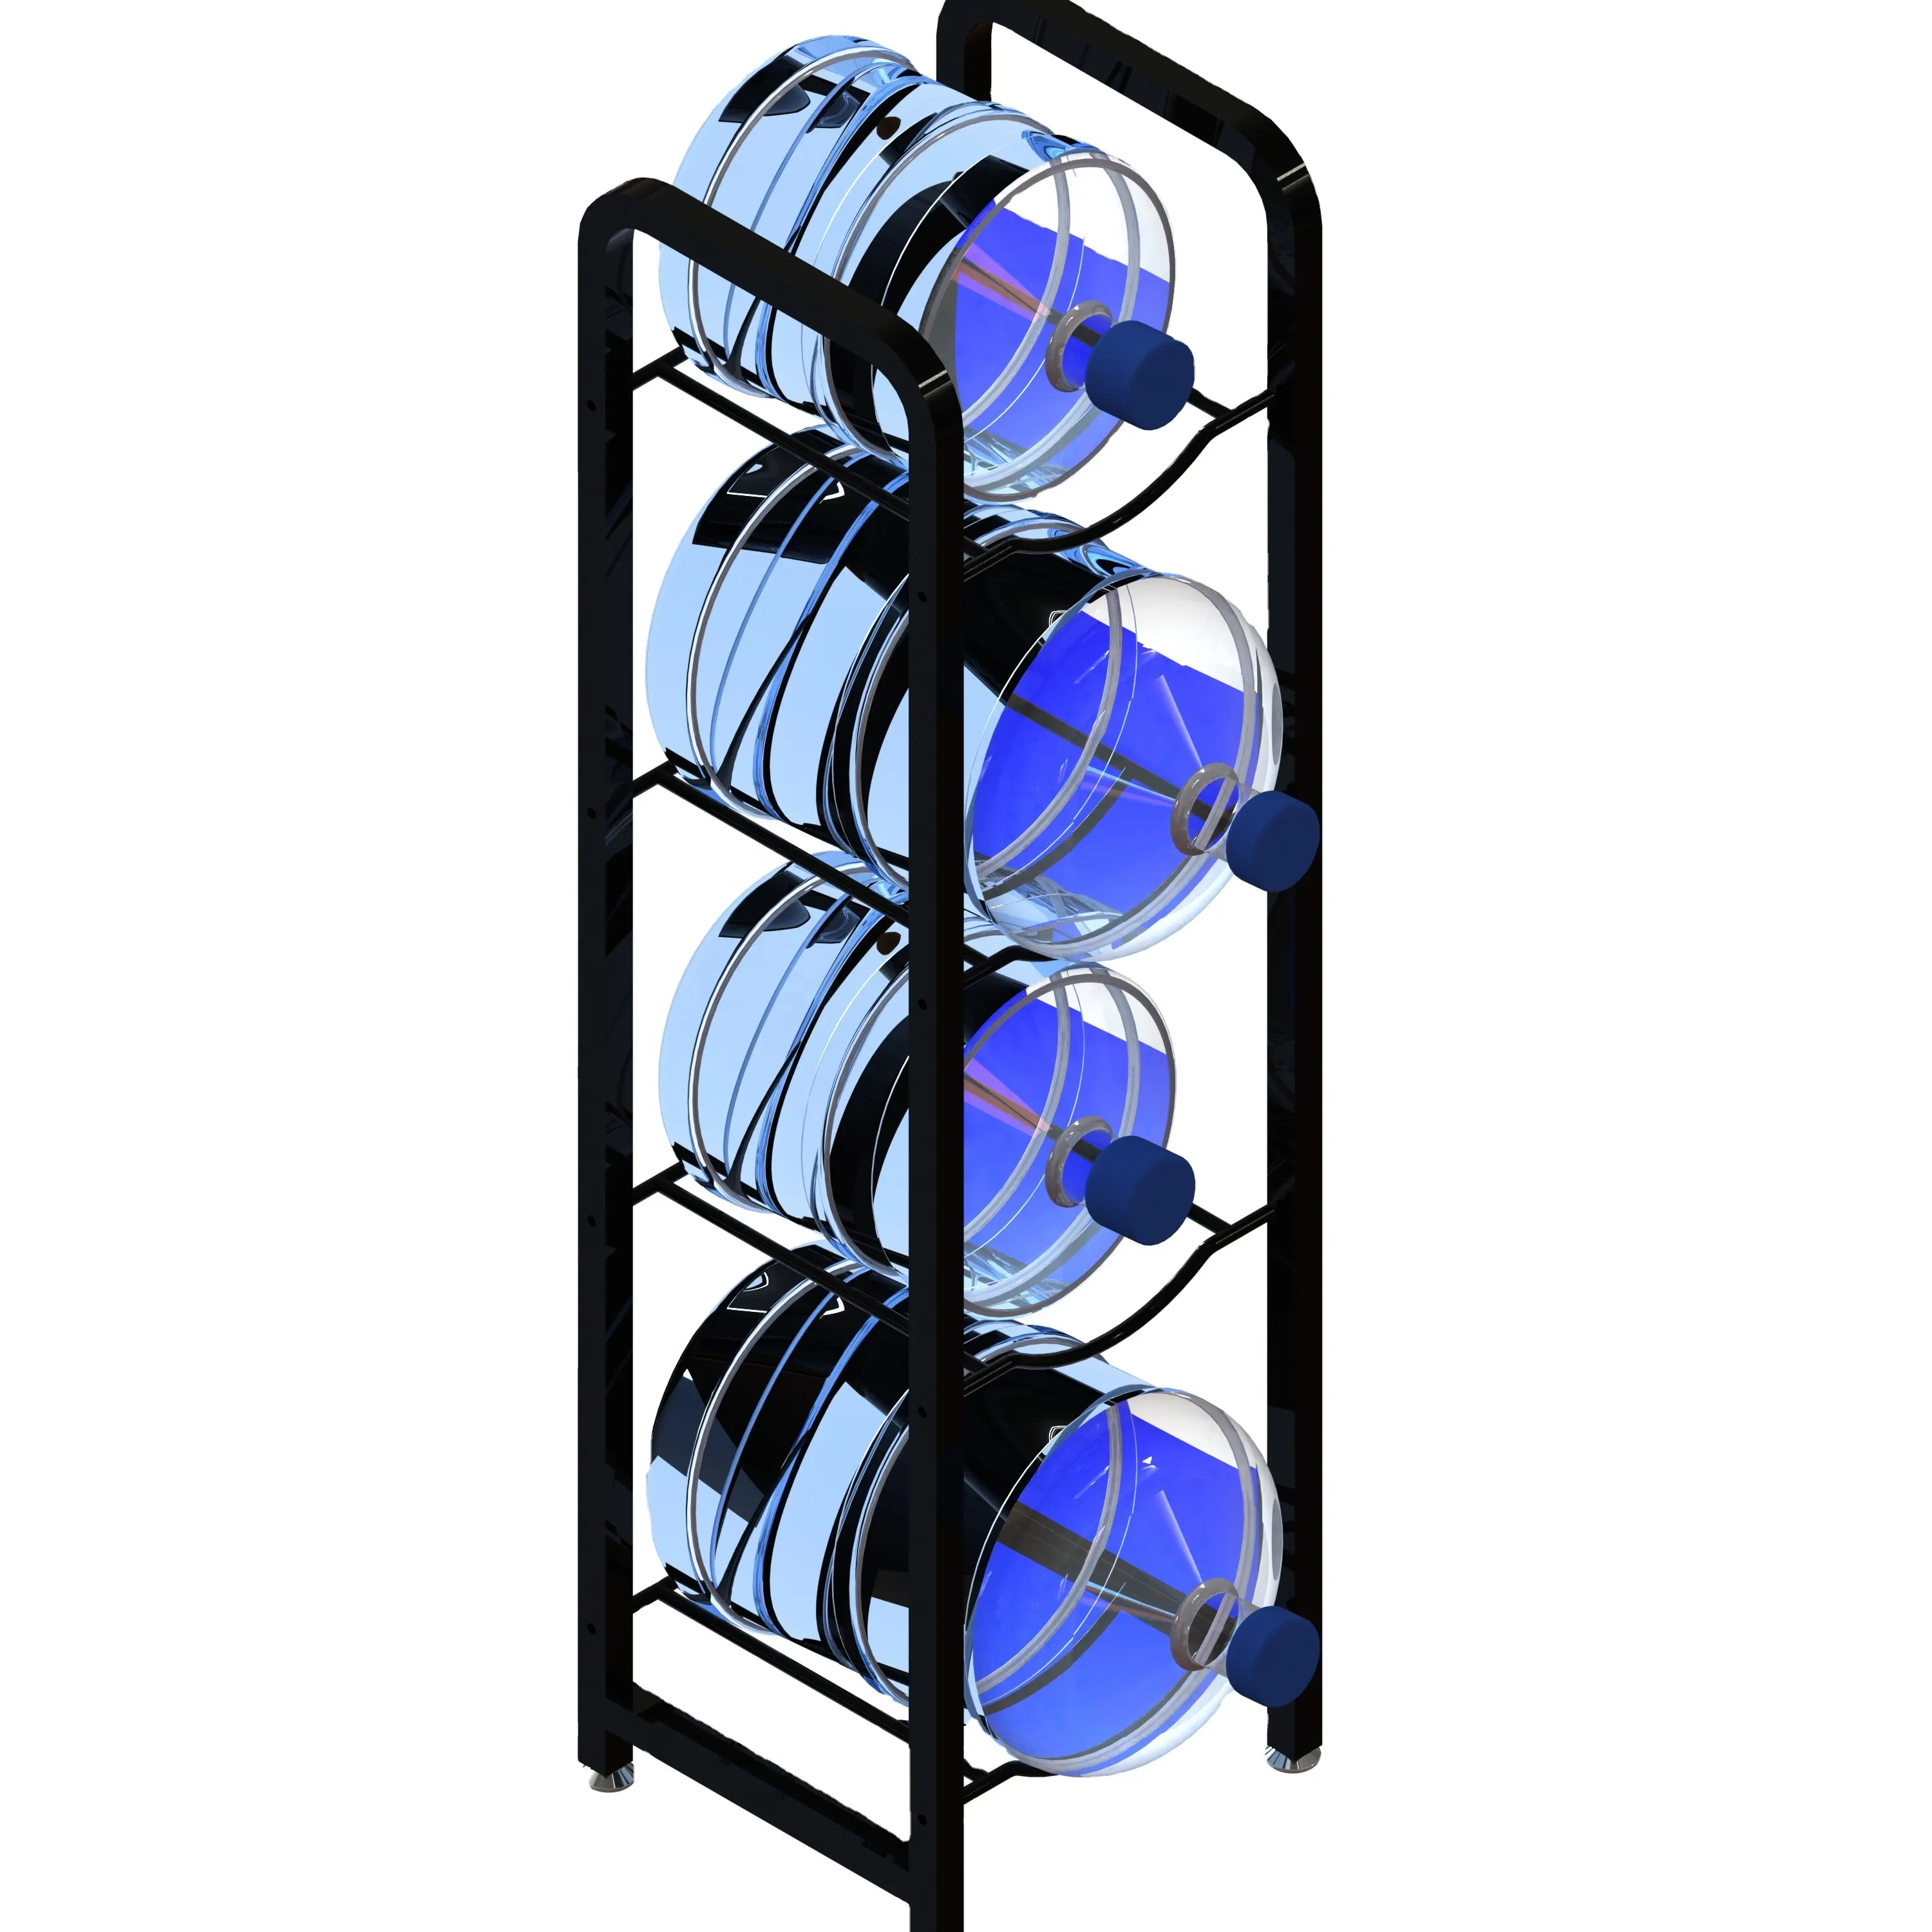 Stable 4 Tiers Water Bottle Display Stand 5 Gallon Water Storage Rack